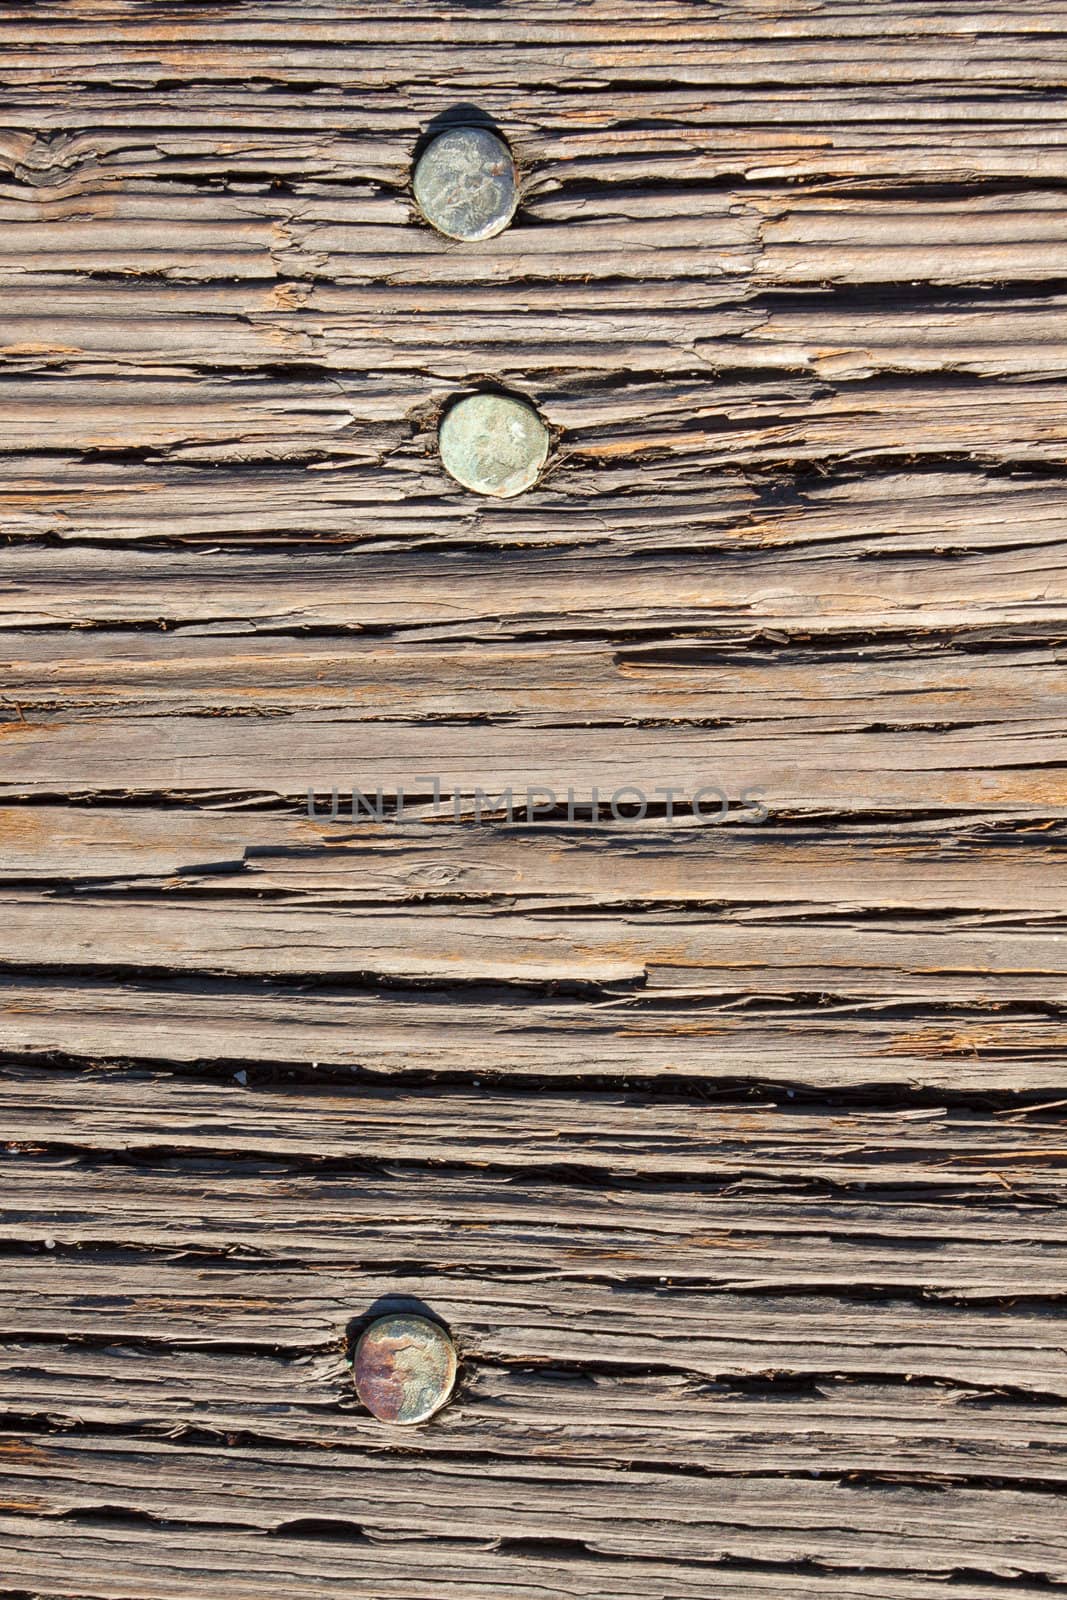 Wood boards are photographed at a dock to create some individual abstract images of the texture of wood after being weathered for many years.